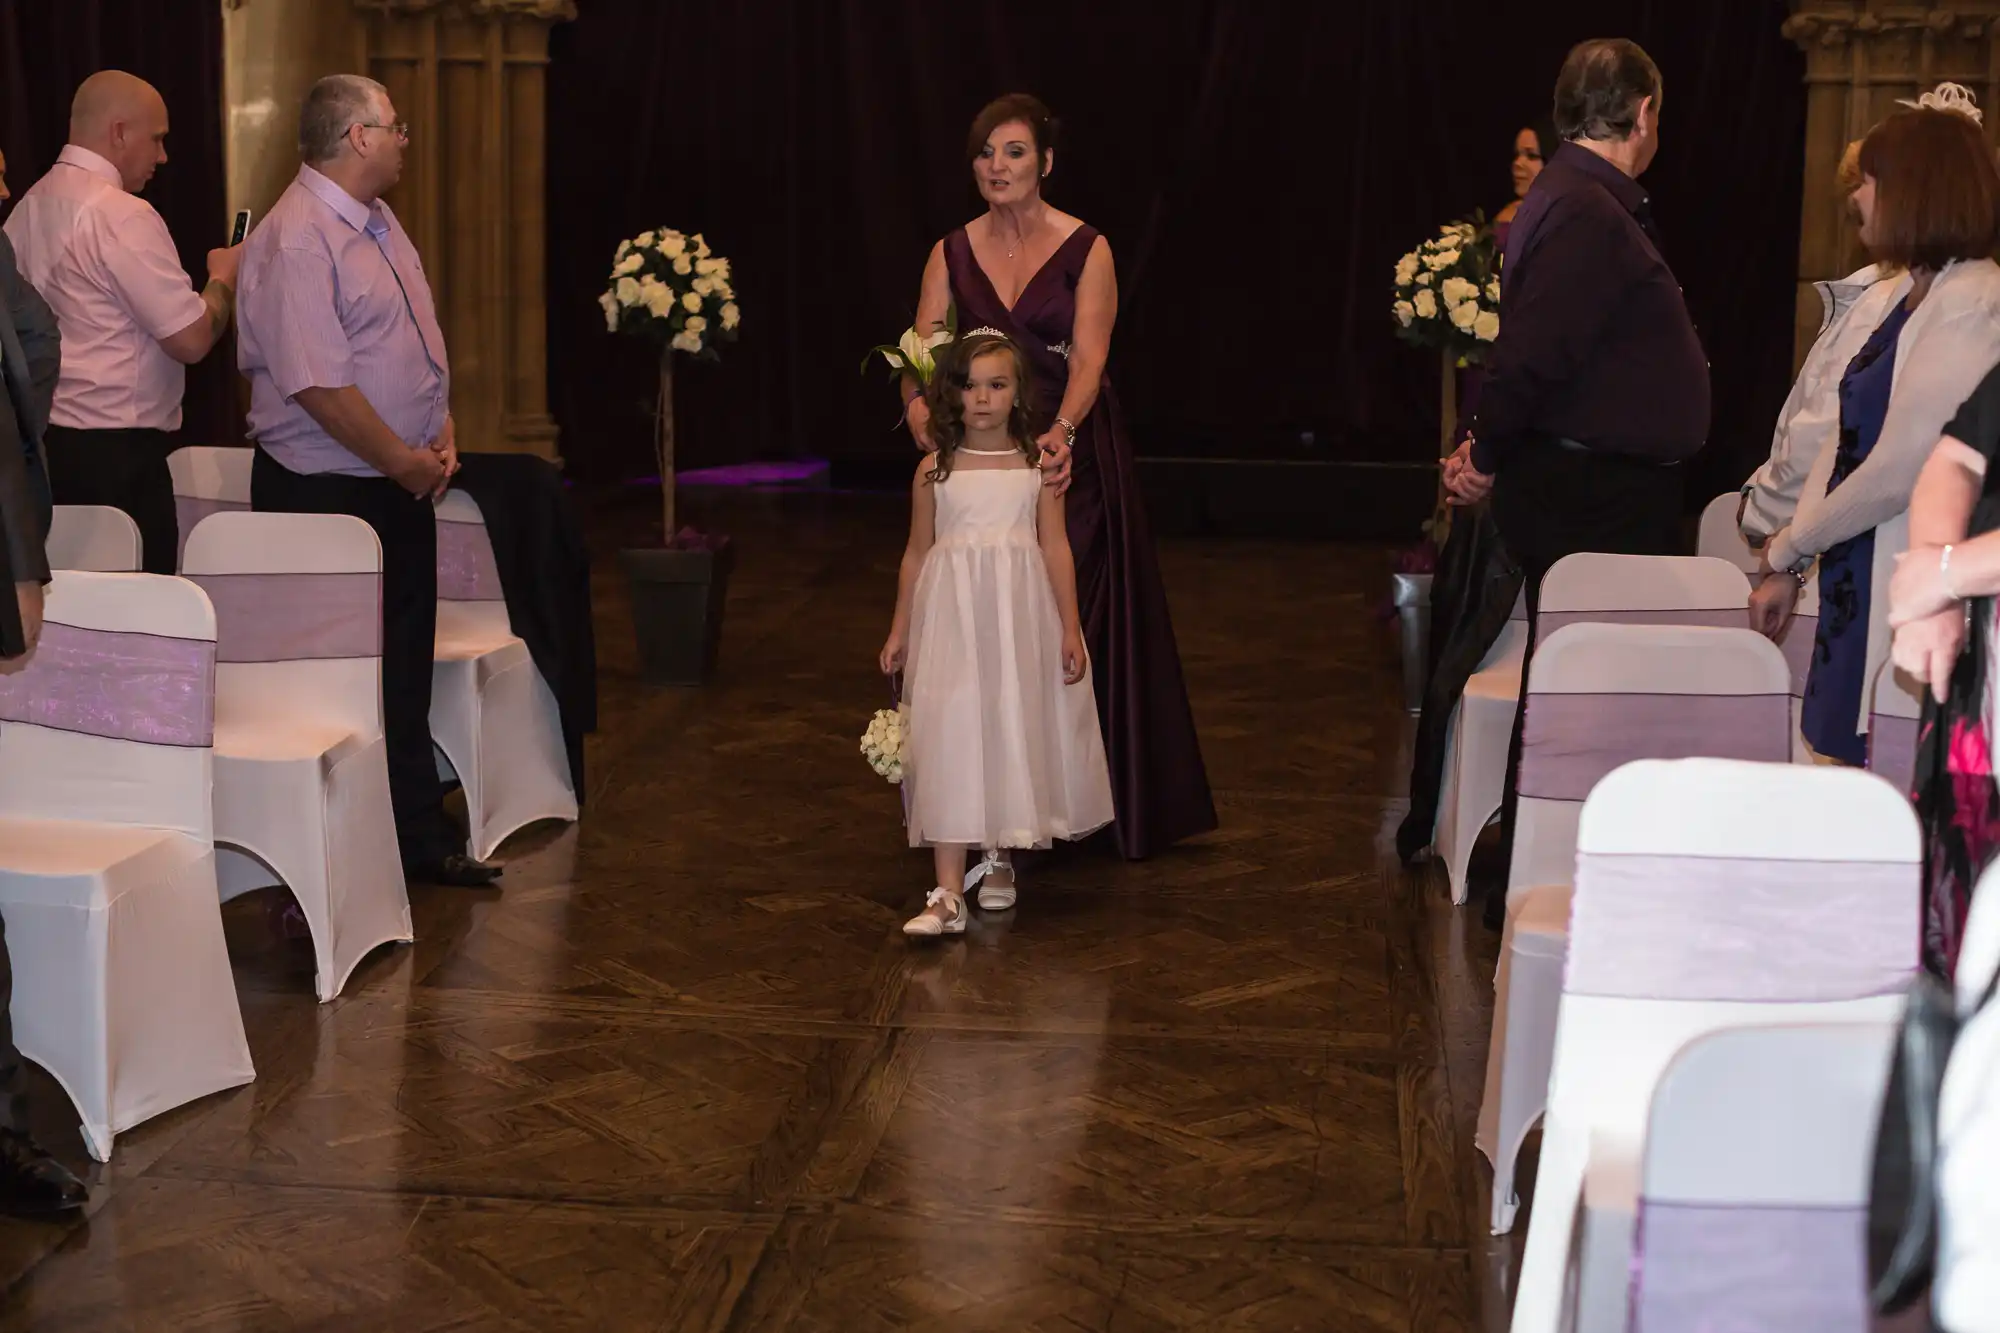 A young girl and a woman in formal dresses walk down an aisle at a wedding ceremony, with guests watching from their seats.